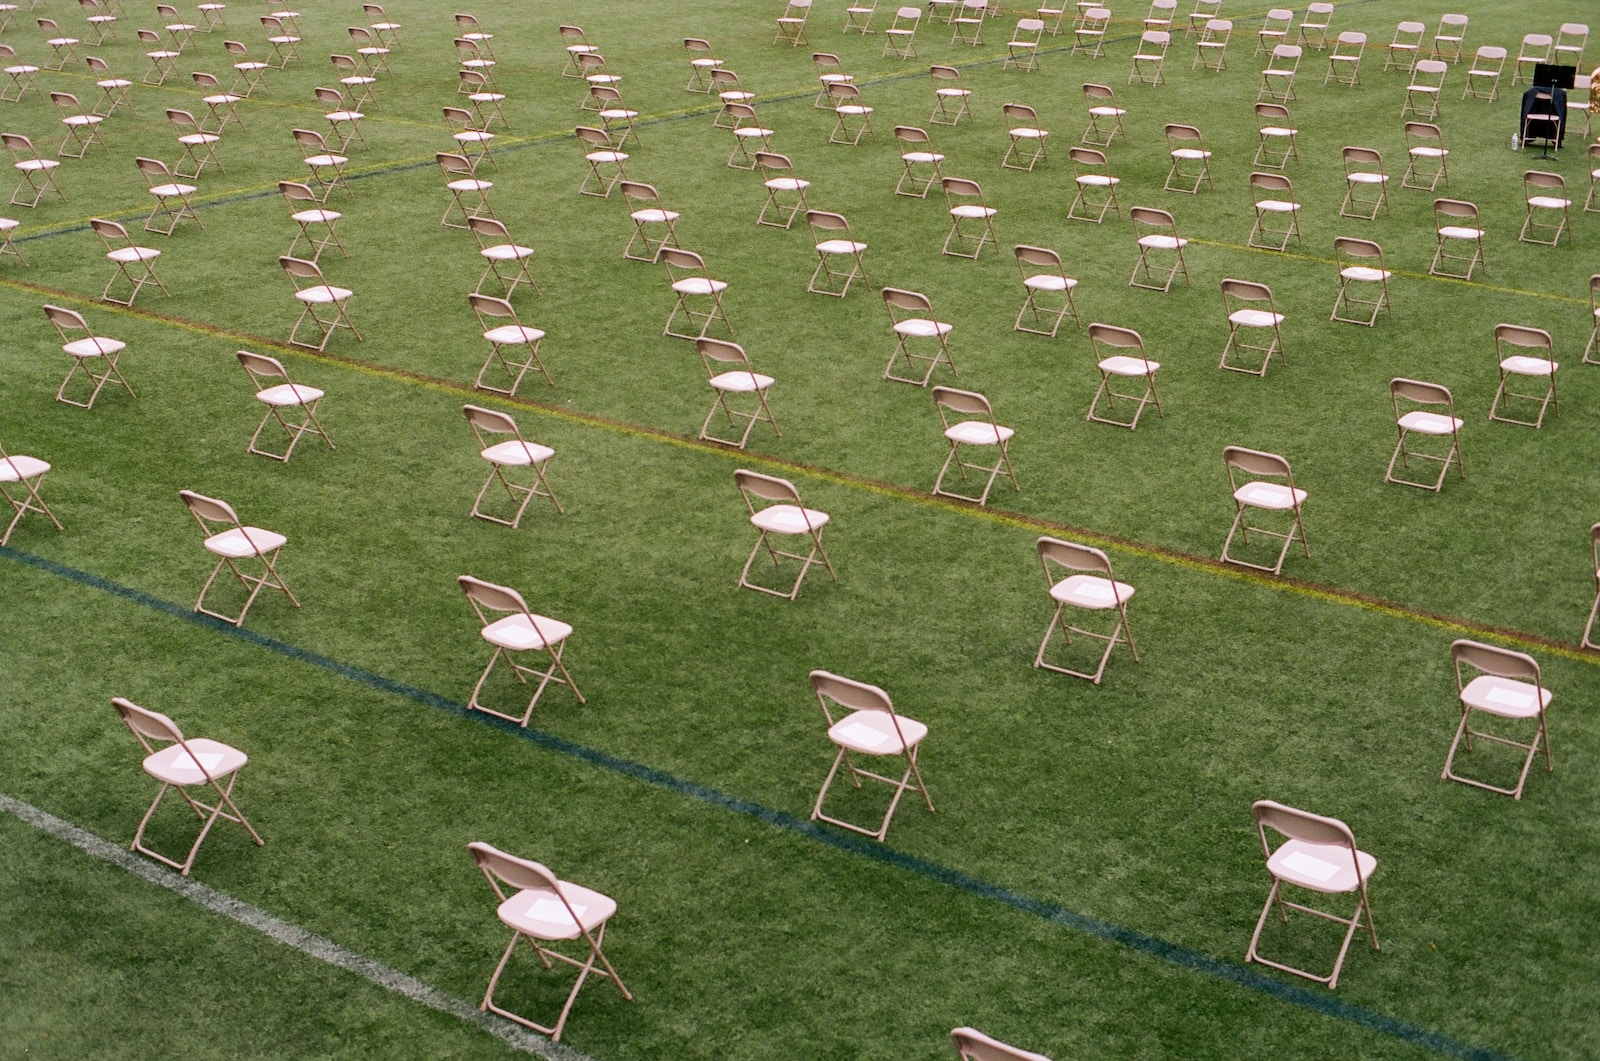 white folding chairs on green grass field